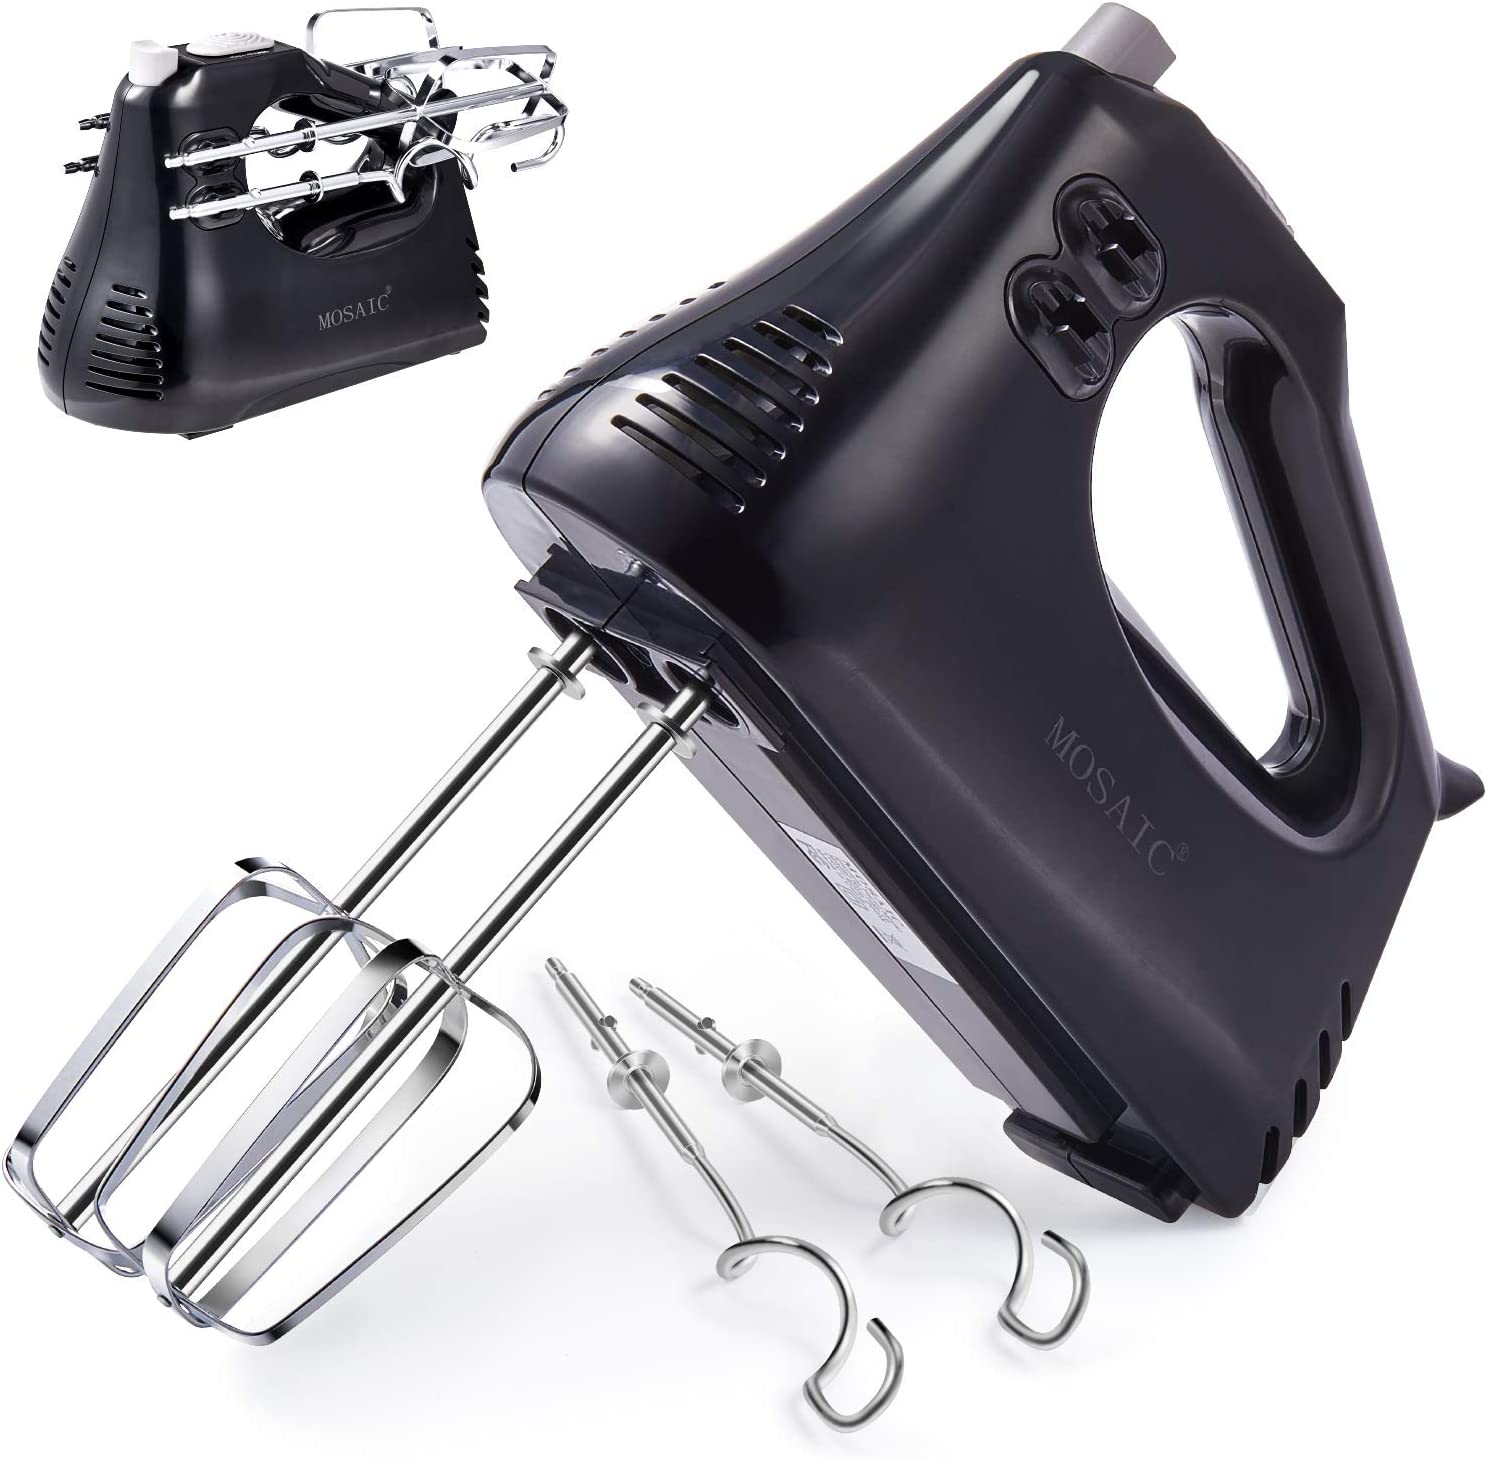  5. MOSAIC 3 Speed Electric Hand-held Mixer 